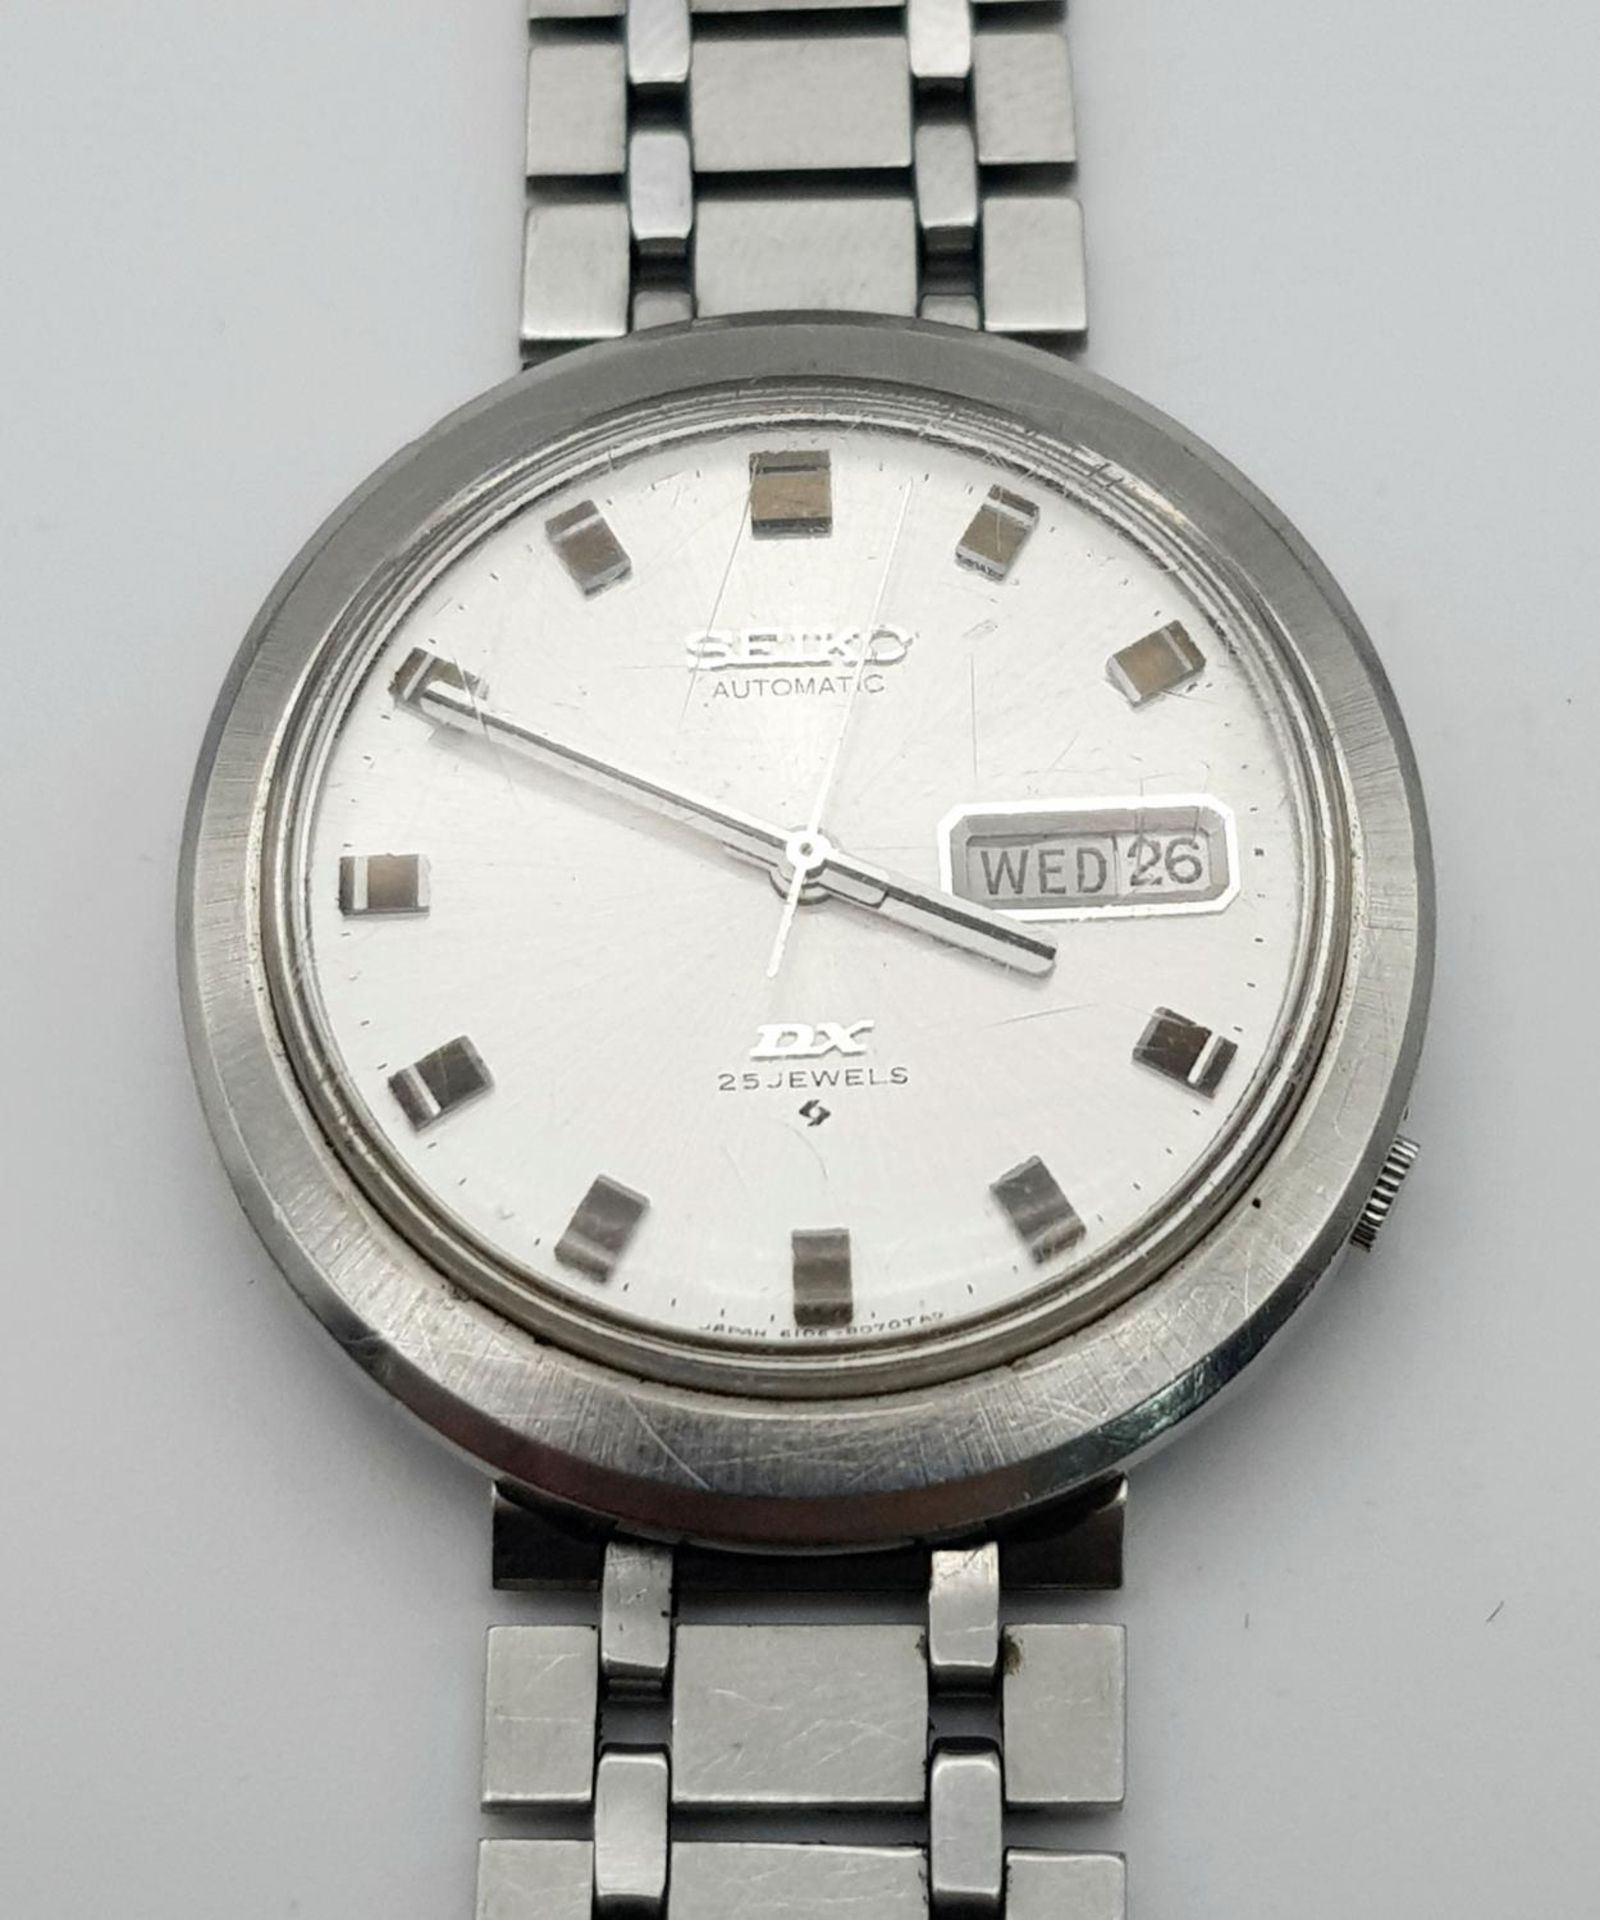 A Seiko Automatic DX 25 Jewels Gents Watch. Bracelet needs replacing. Case - 36mm. In working order. - Image 2 of 4